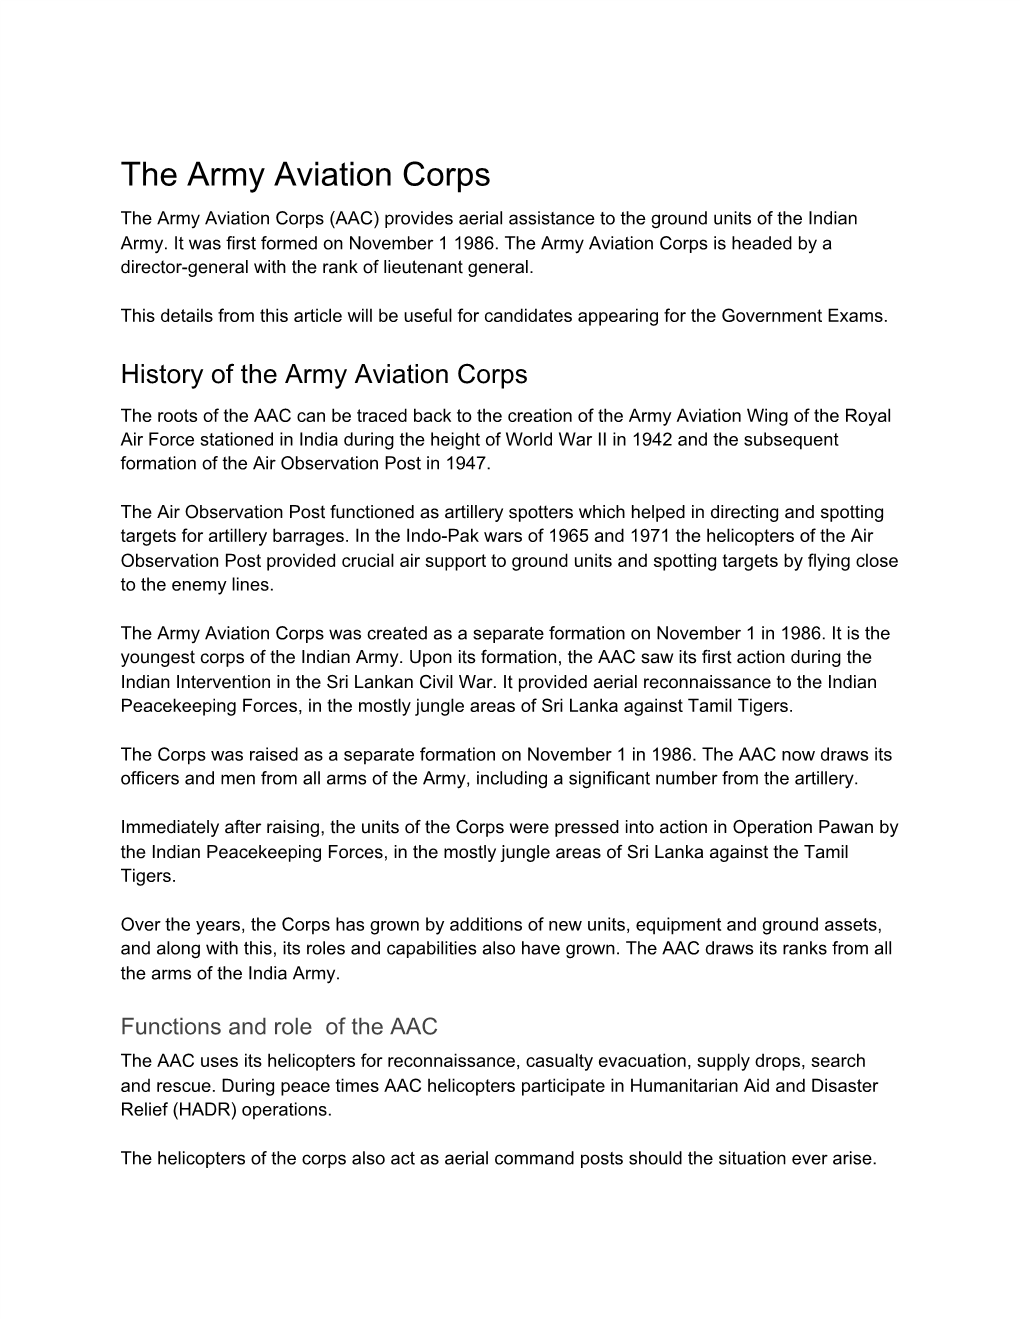 The Army Aviation Corps the Army Aviation Corps (AAC) Provides Aerial Assistance to the Ground Units of the Indian Army